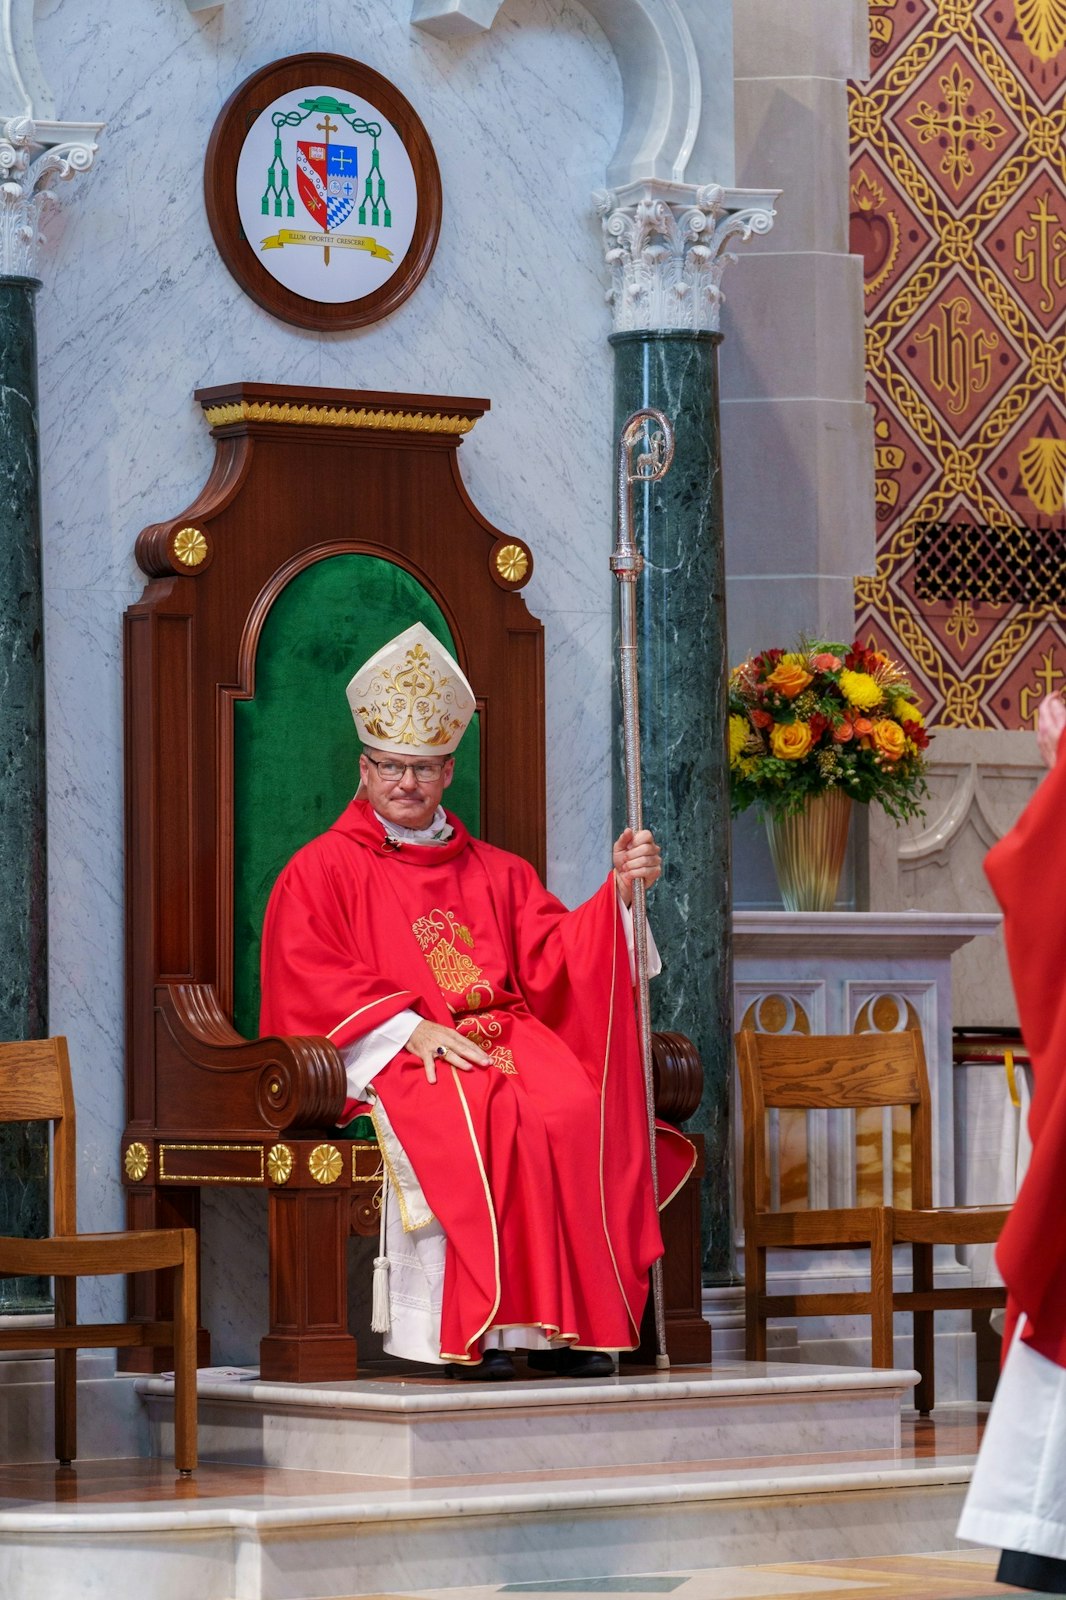 Bishop Edward M. Lohse takes his cathedra for the first time as bishop of the Diocese of Kalamazoo. A priest of the Diocese of Erie, Pa., Bishop Lohse said he hopes to take inspiration from the martyrs of the Church as he leads the faithful in professing Jesus Christ as Lord. (Vince Dragone | Diocese of Erie)